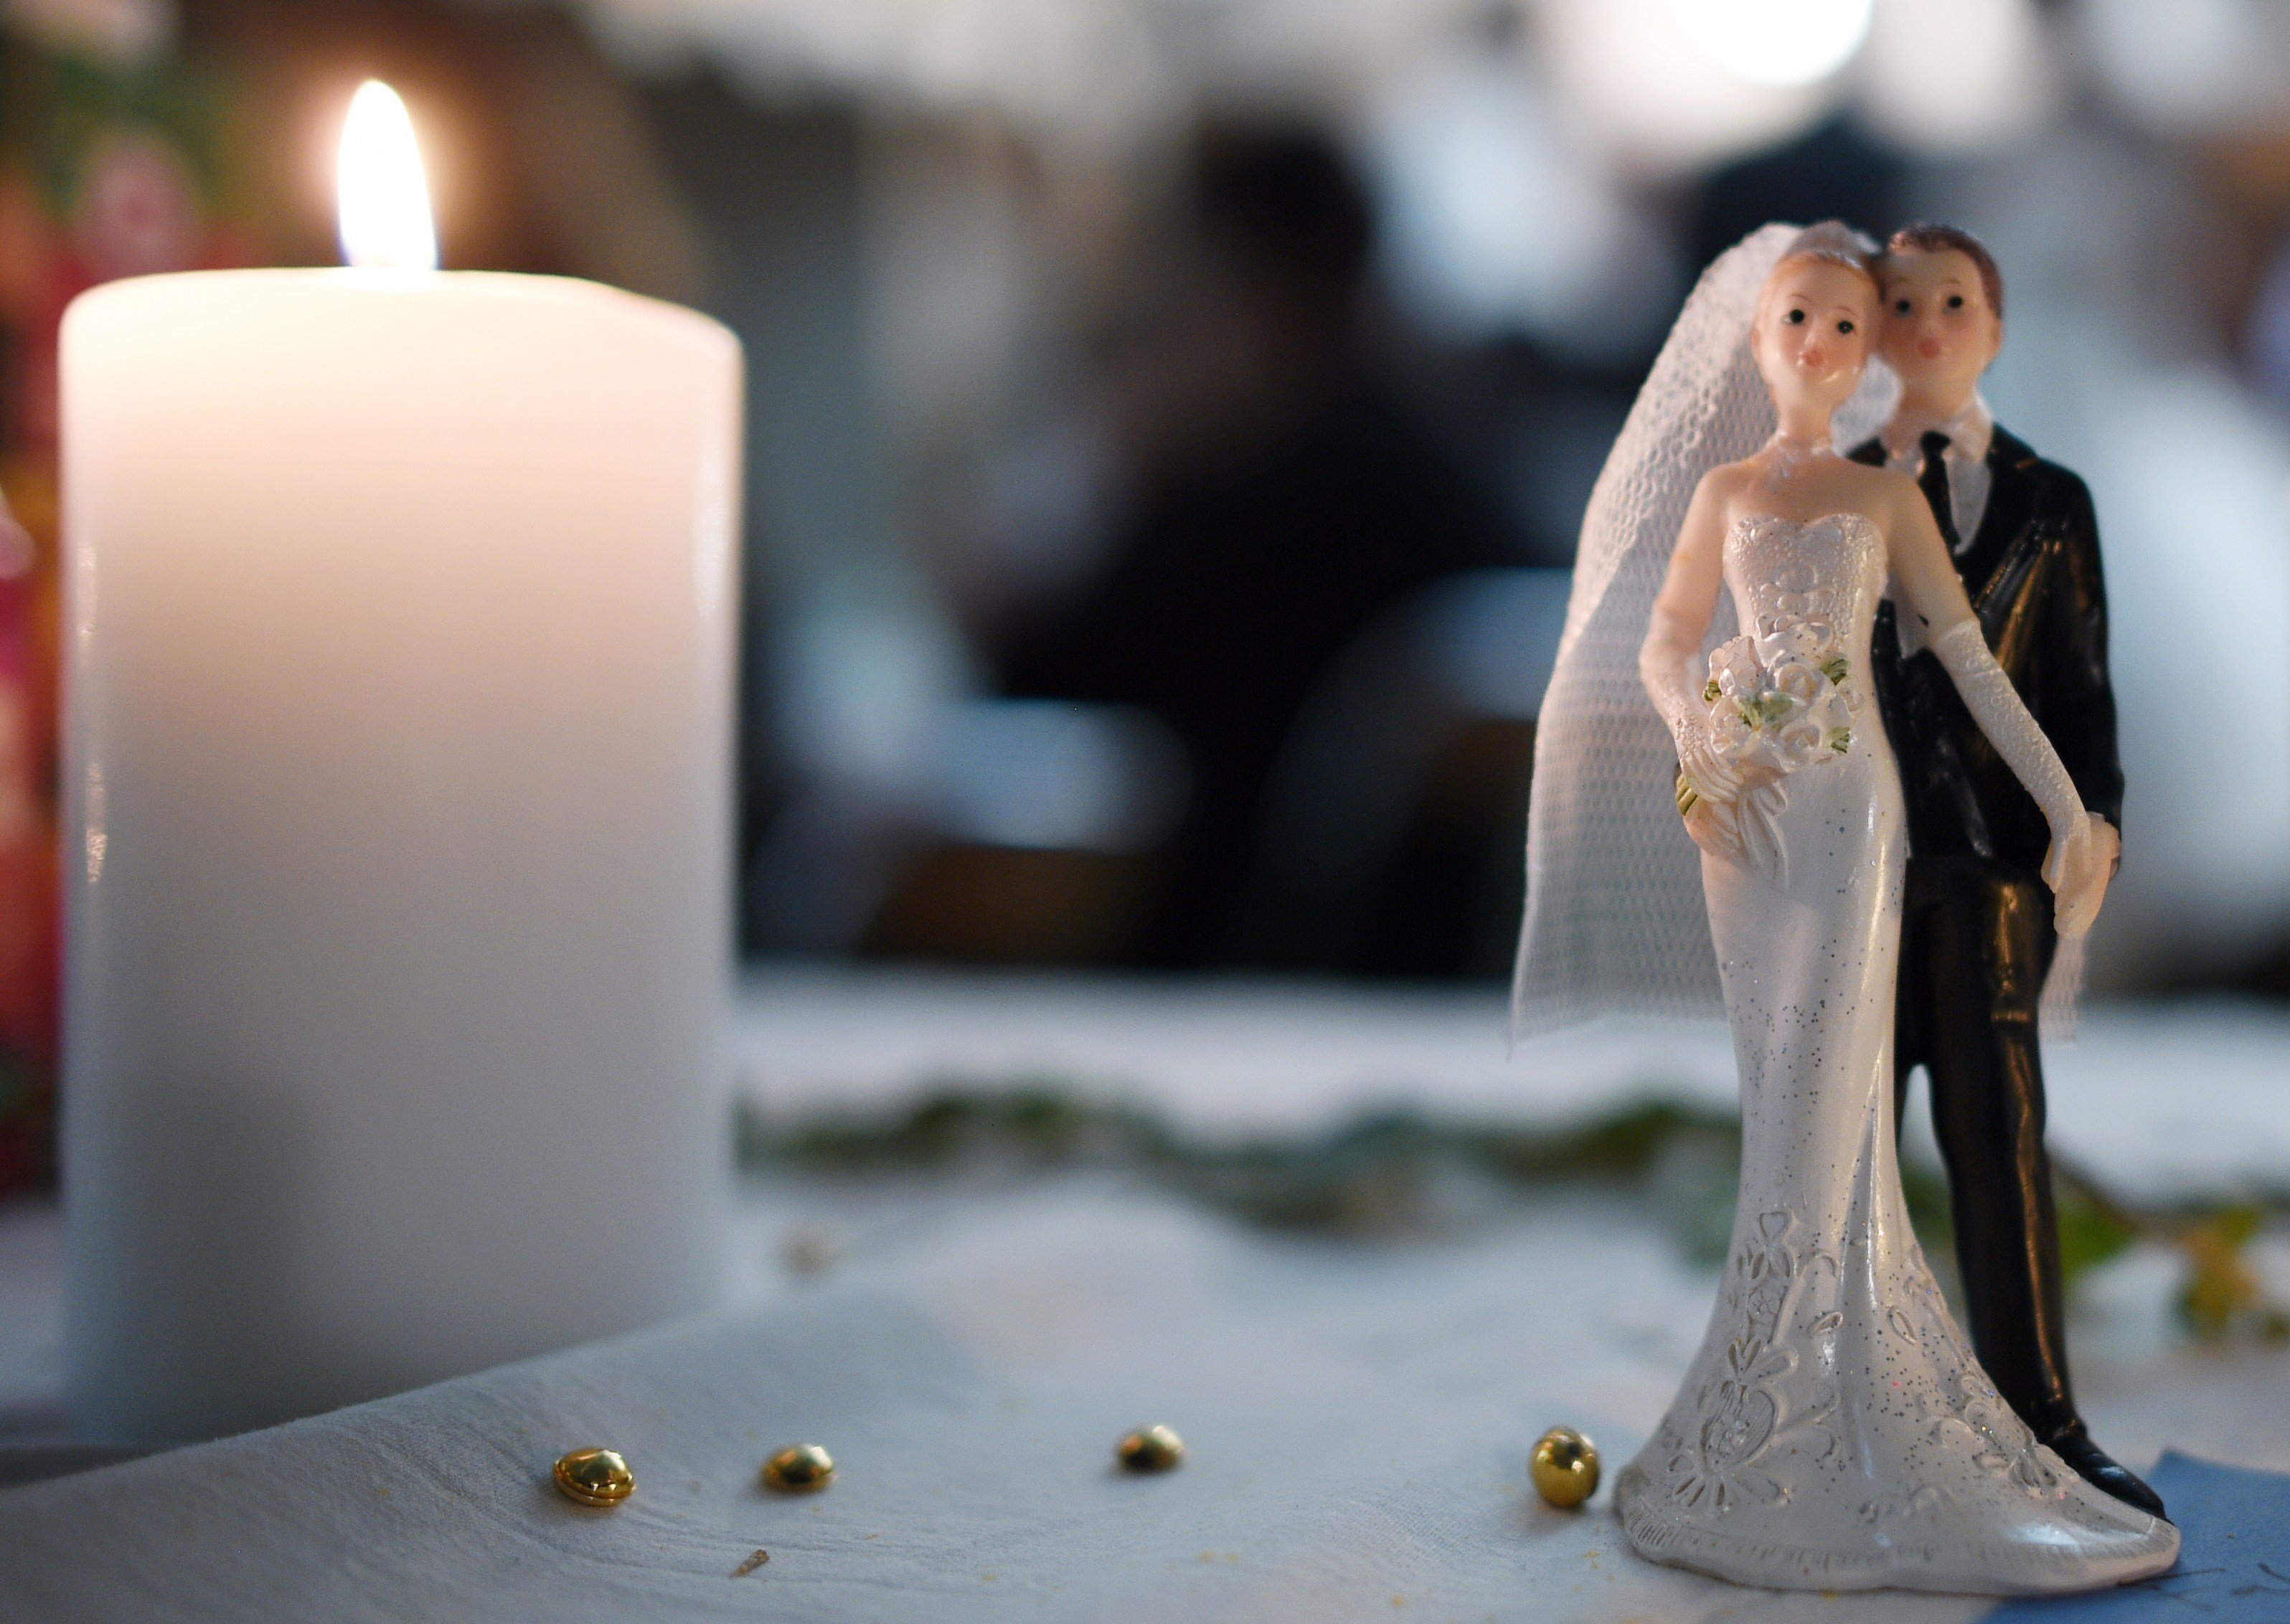 Bride and groom figurines next to a candle on a table